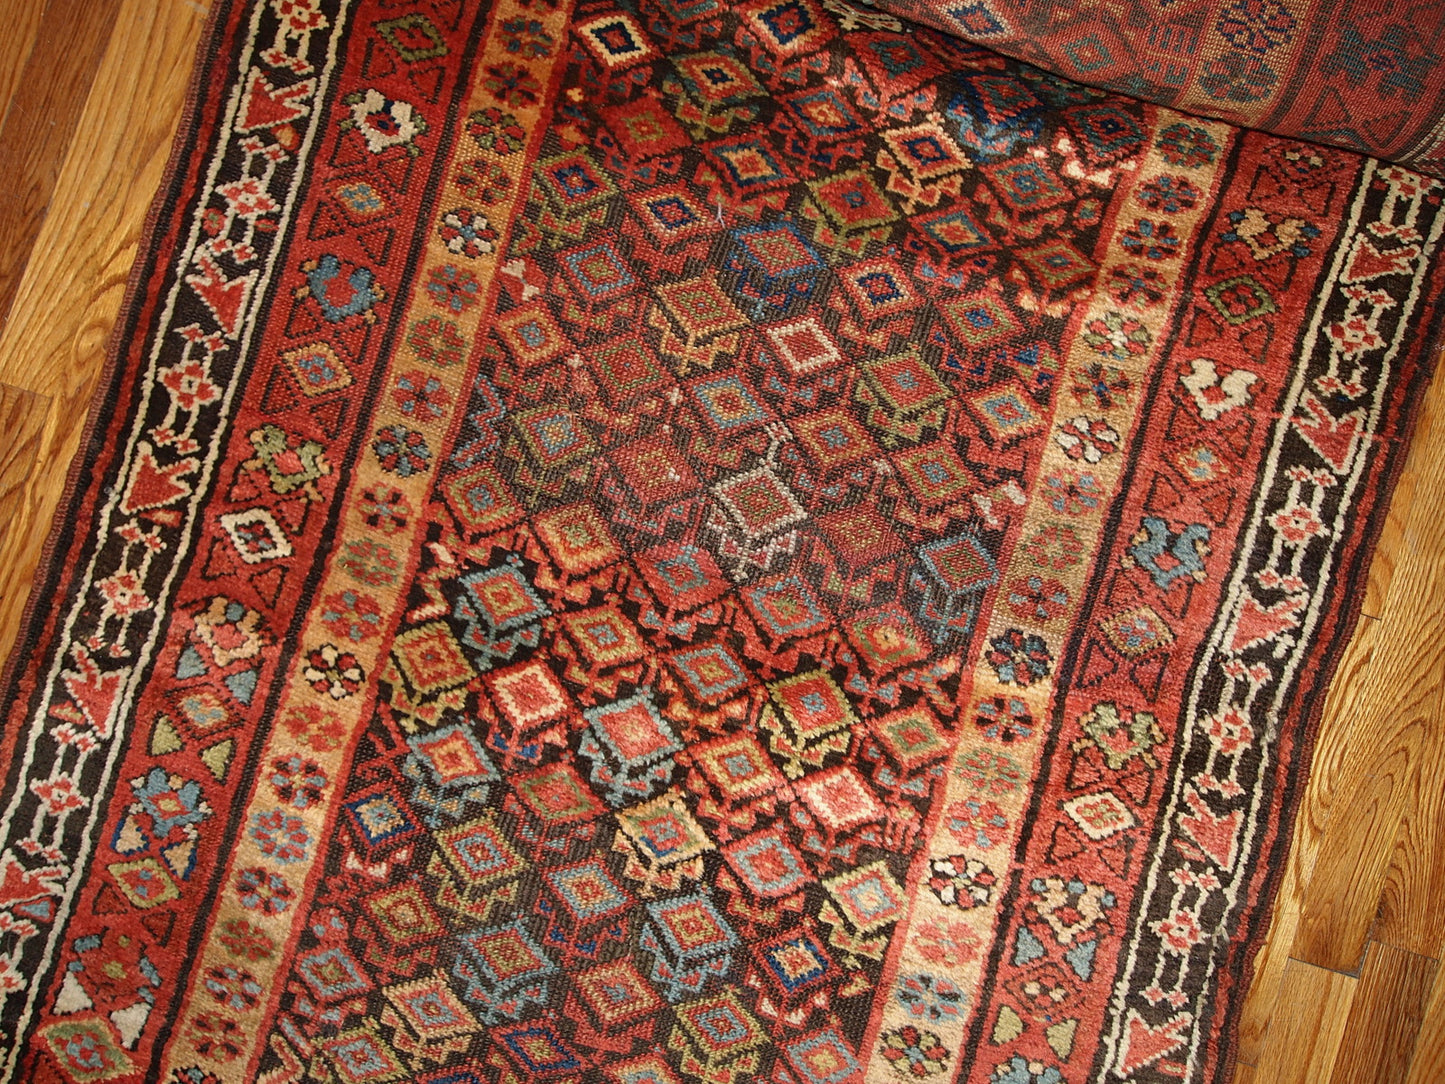 Antique hand made Kurdish runner in traditional Persian geometric design all over the chocolate brown field. The rug is from the end of 19th century in original good condition.